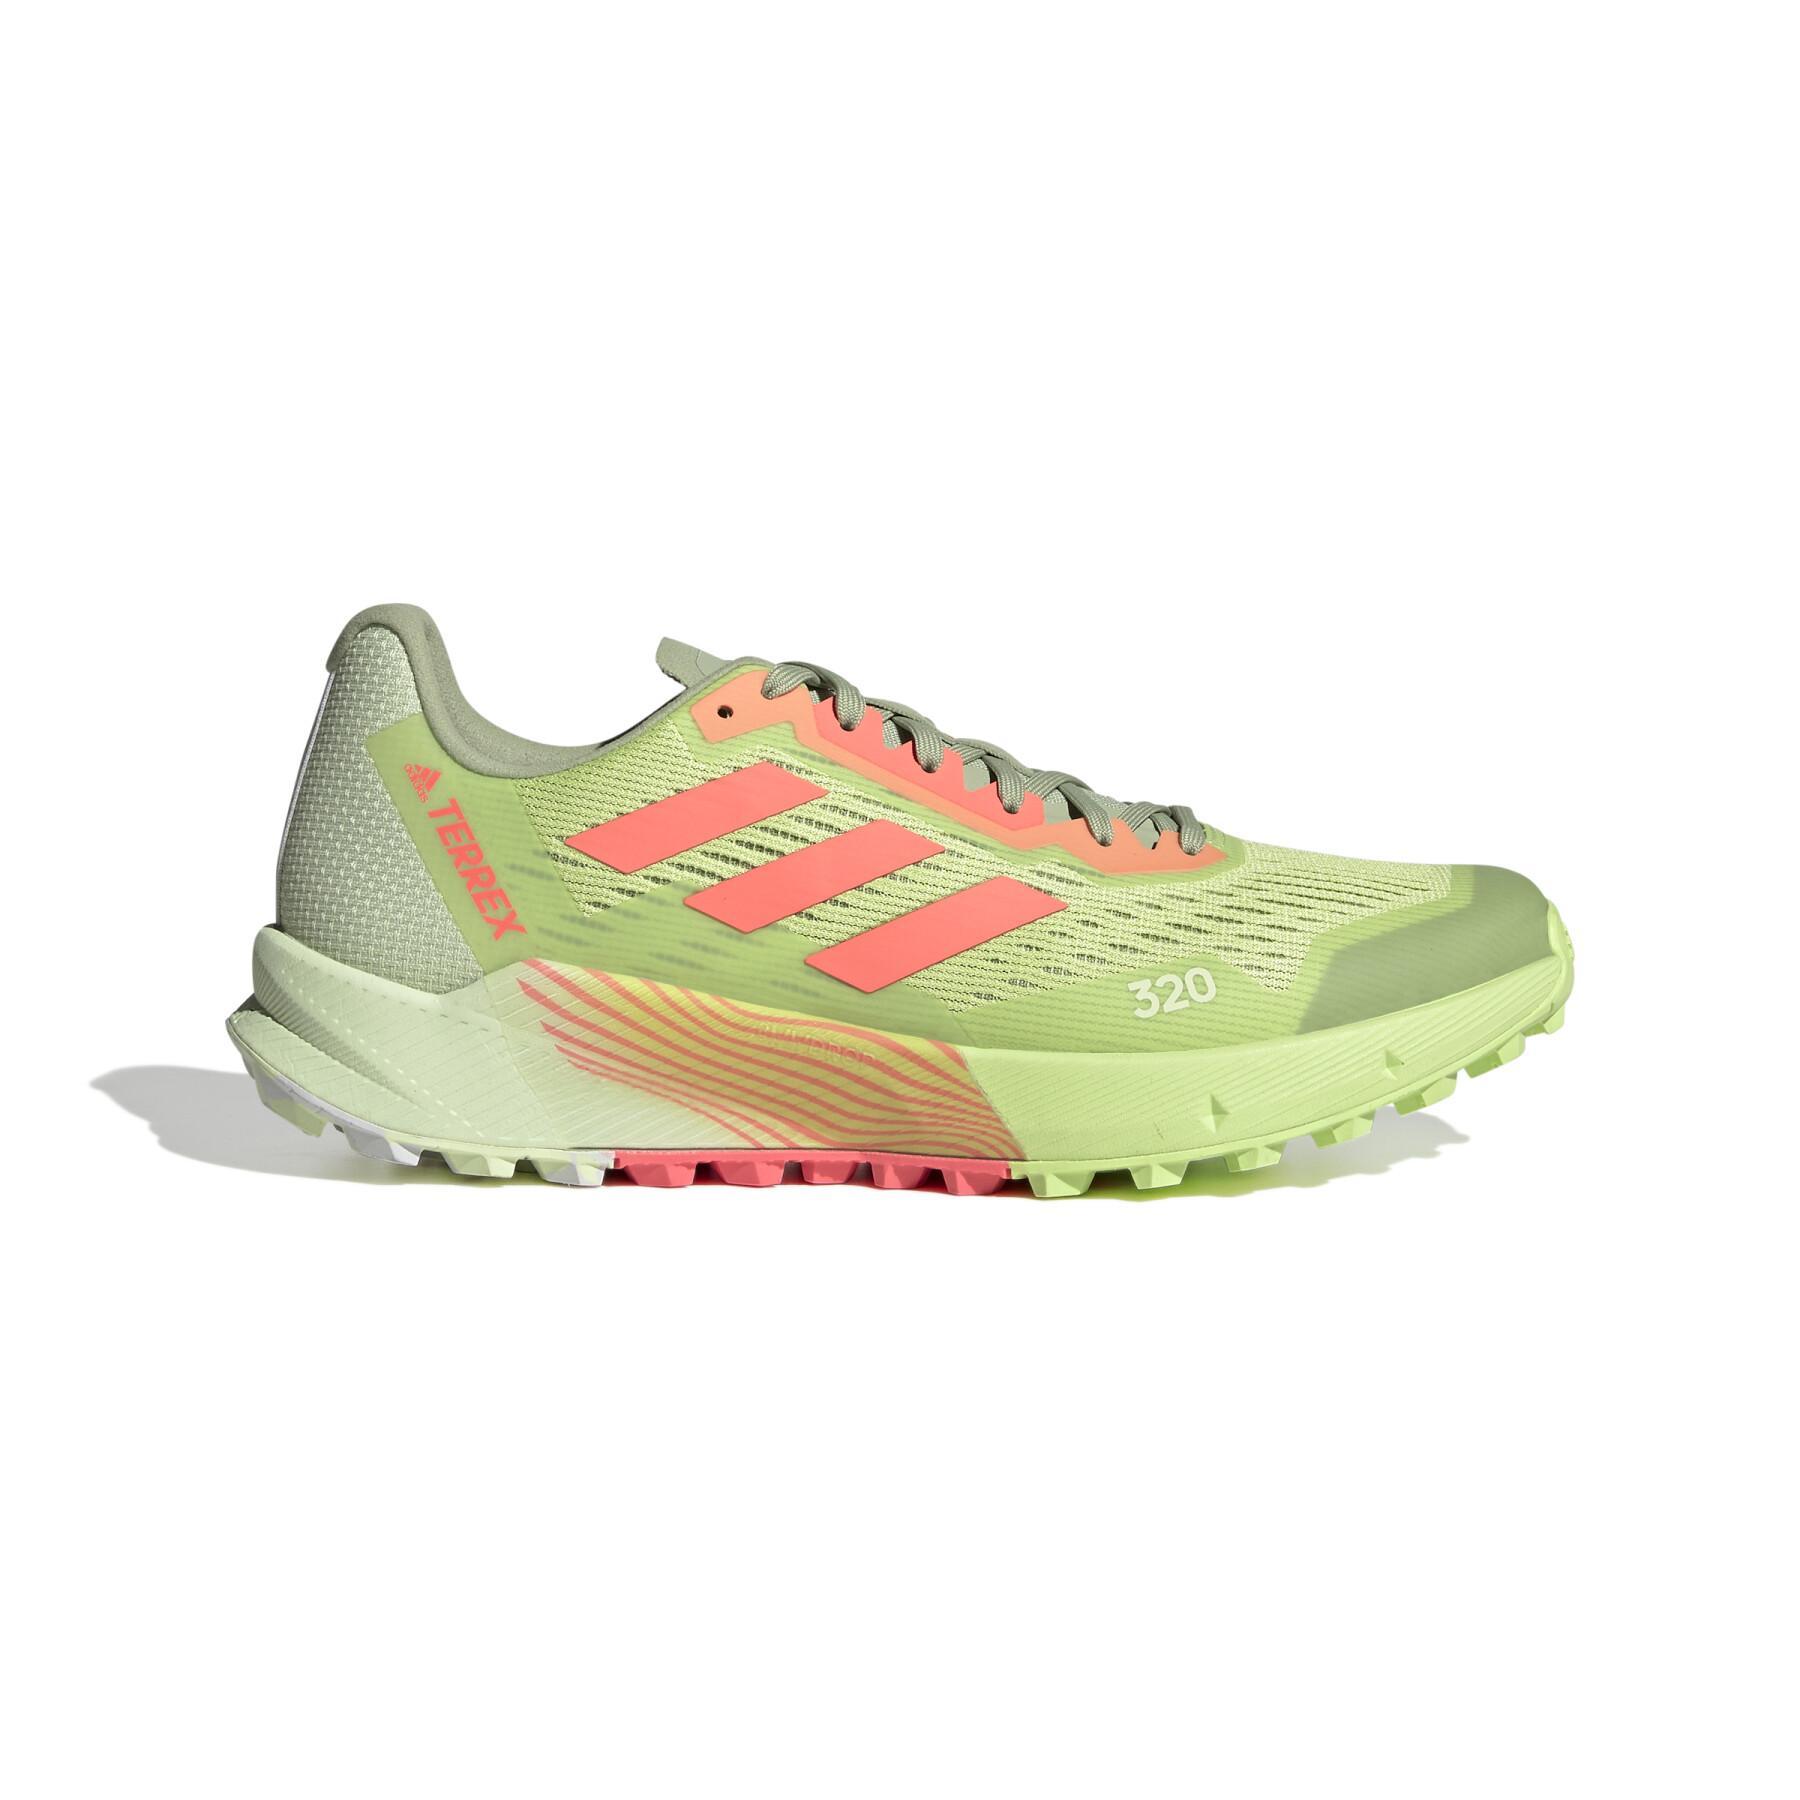 Trail running shoes adidas Terrex Agravic Flow 2.0